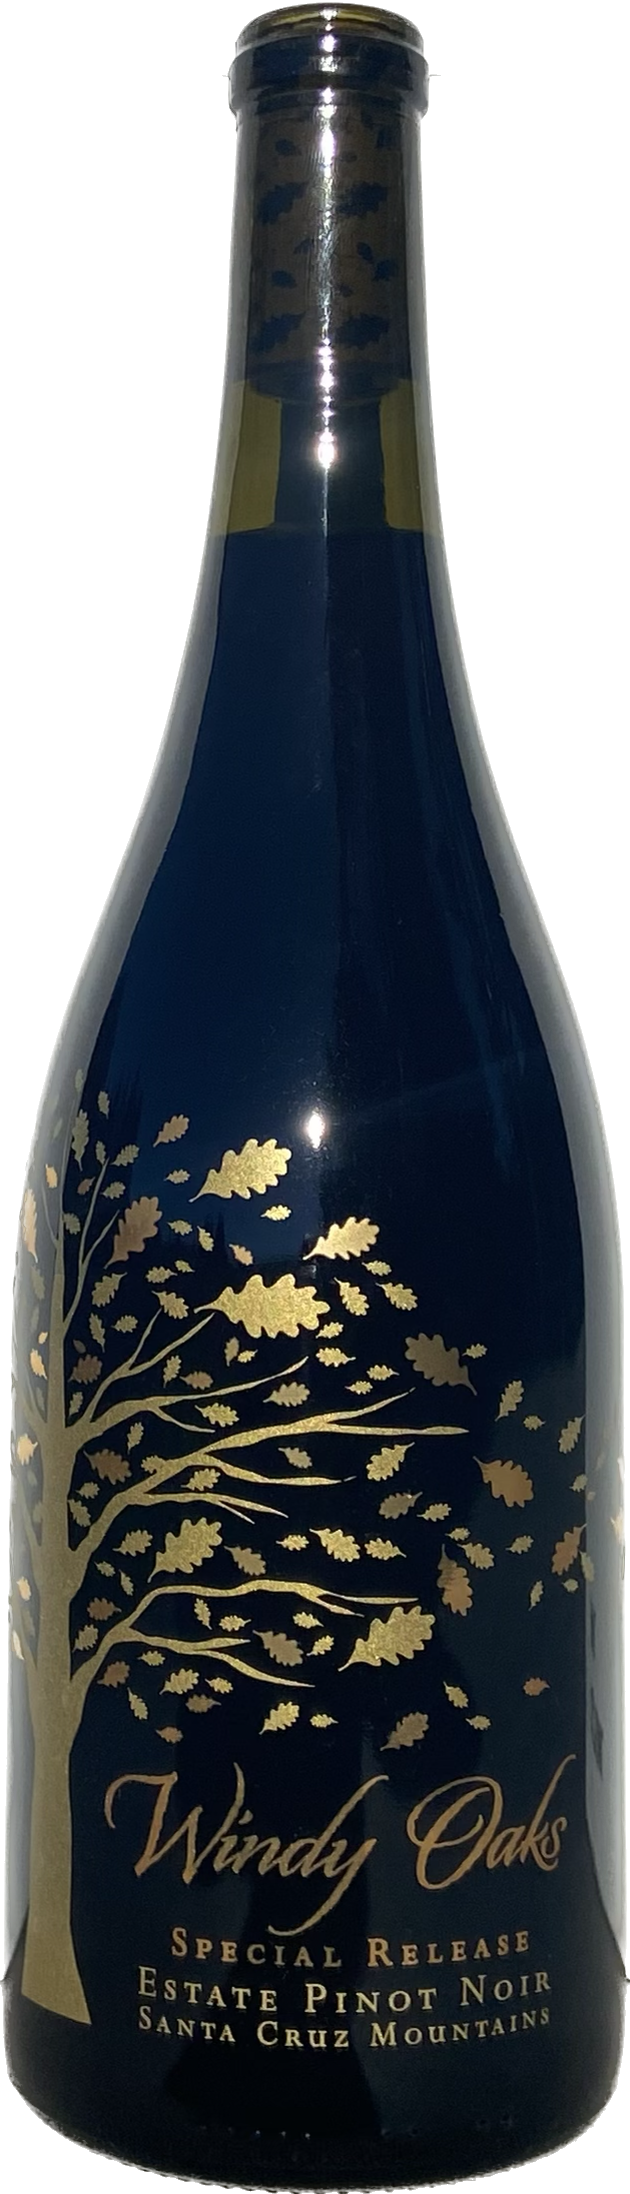 Product Image for 2019 Estate Pinot Noir, Special Release, "Perfect Marriage"